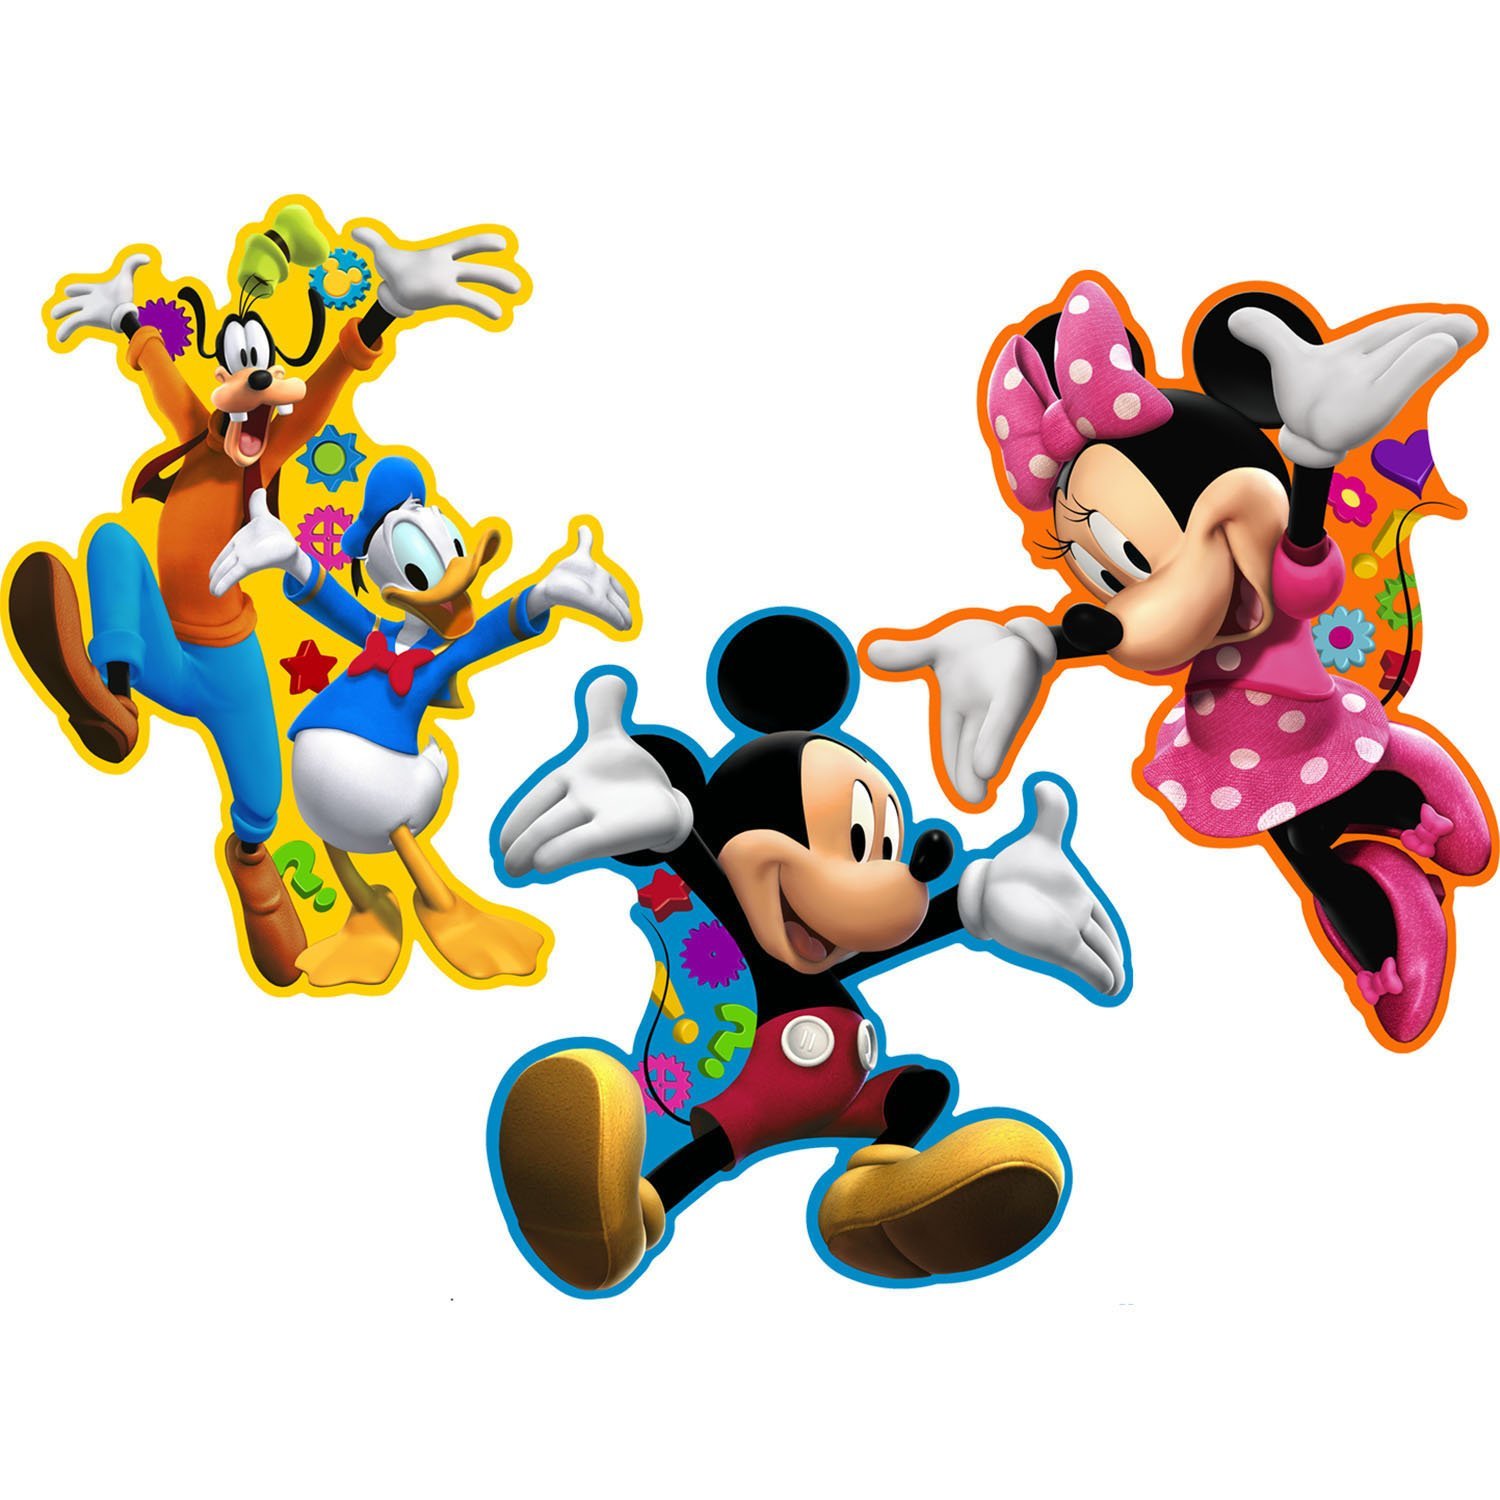 mouse house clipart - photo #39